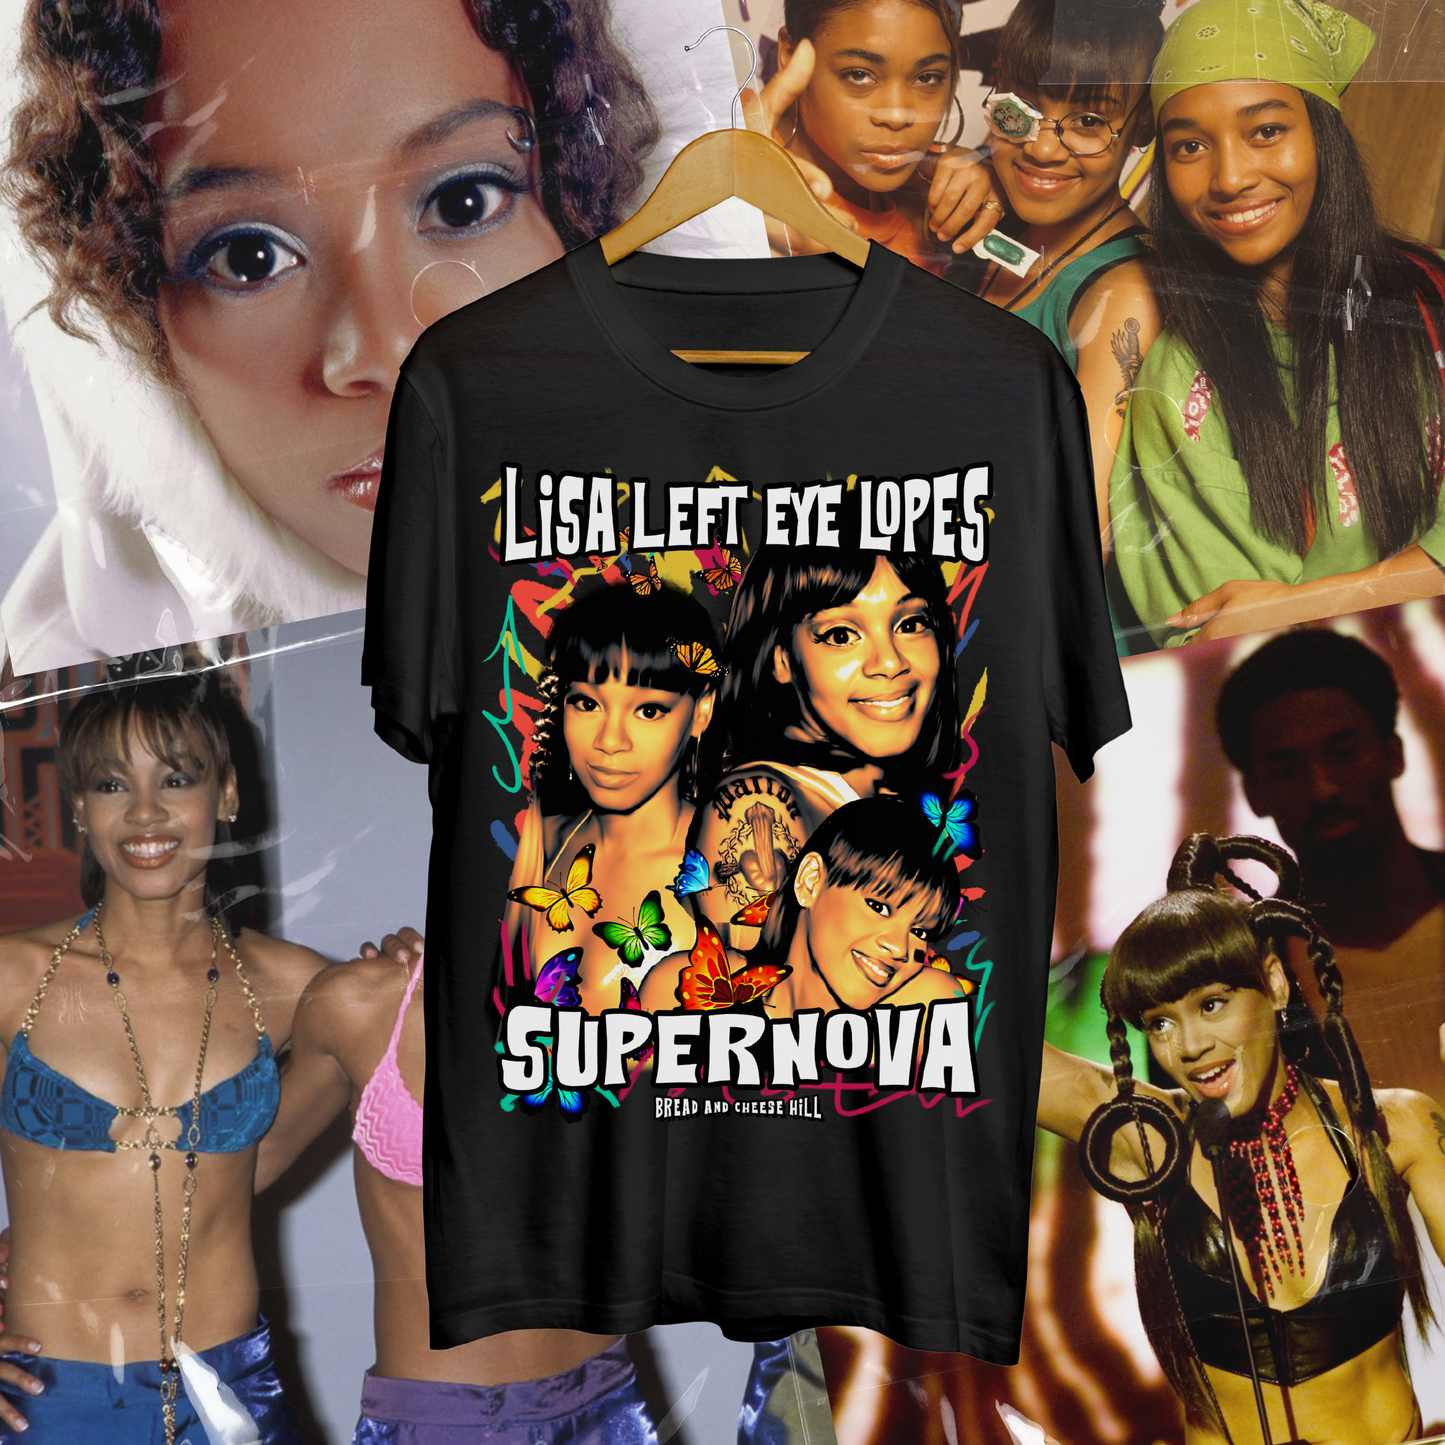 Lisa Left Eye Lopes - BACH T-ShirtBread And Cheese Hill